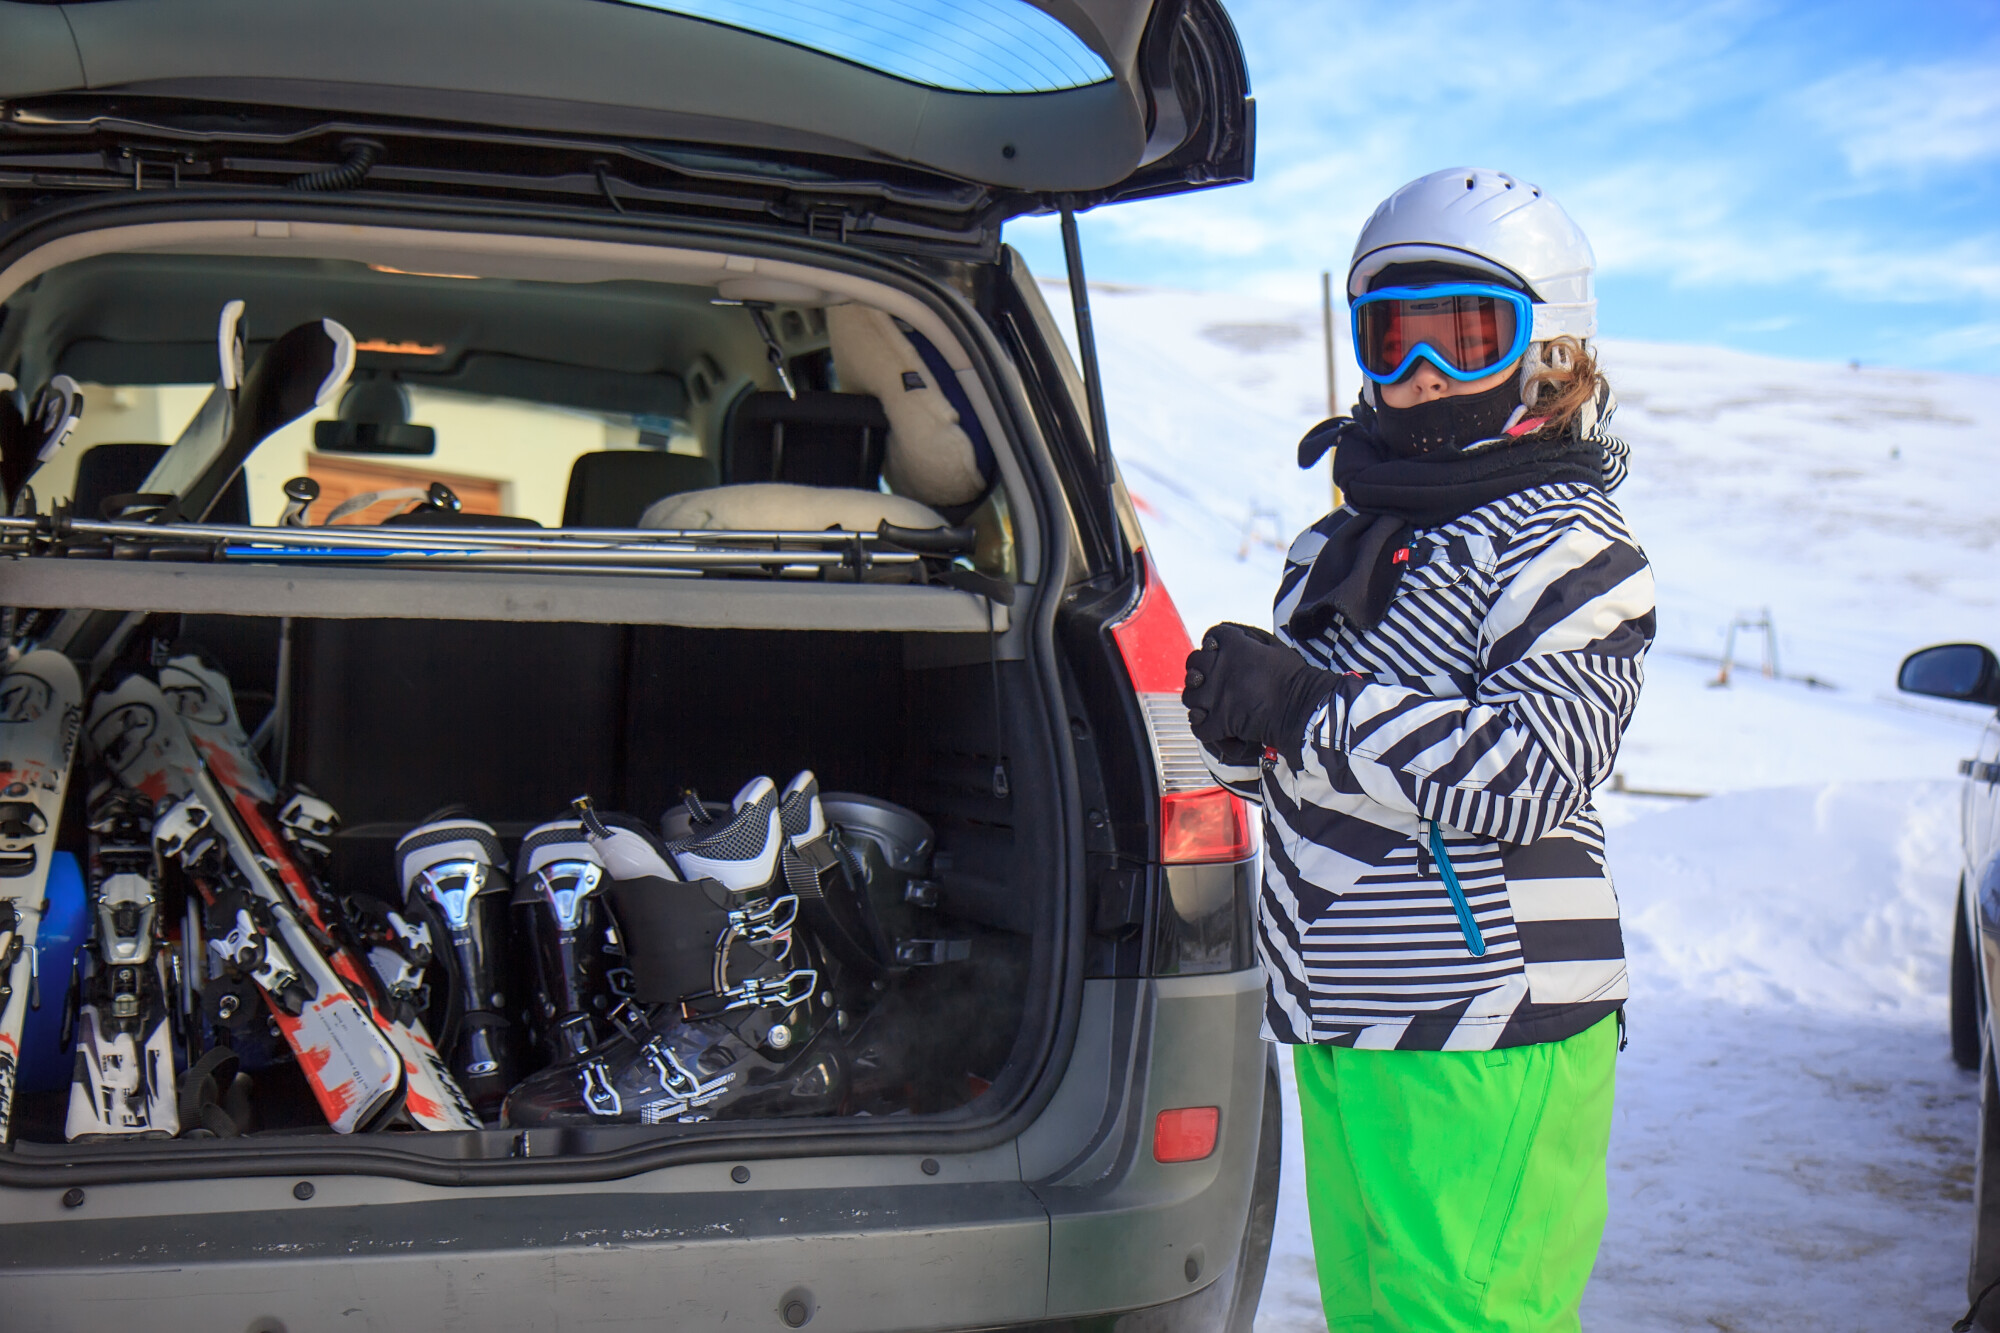 Make sure you aren't missing anything for your next ski vacation with this helpful list. Check out this ski packing list for guidance.